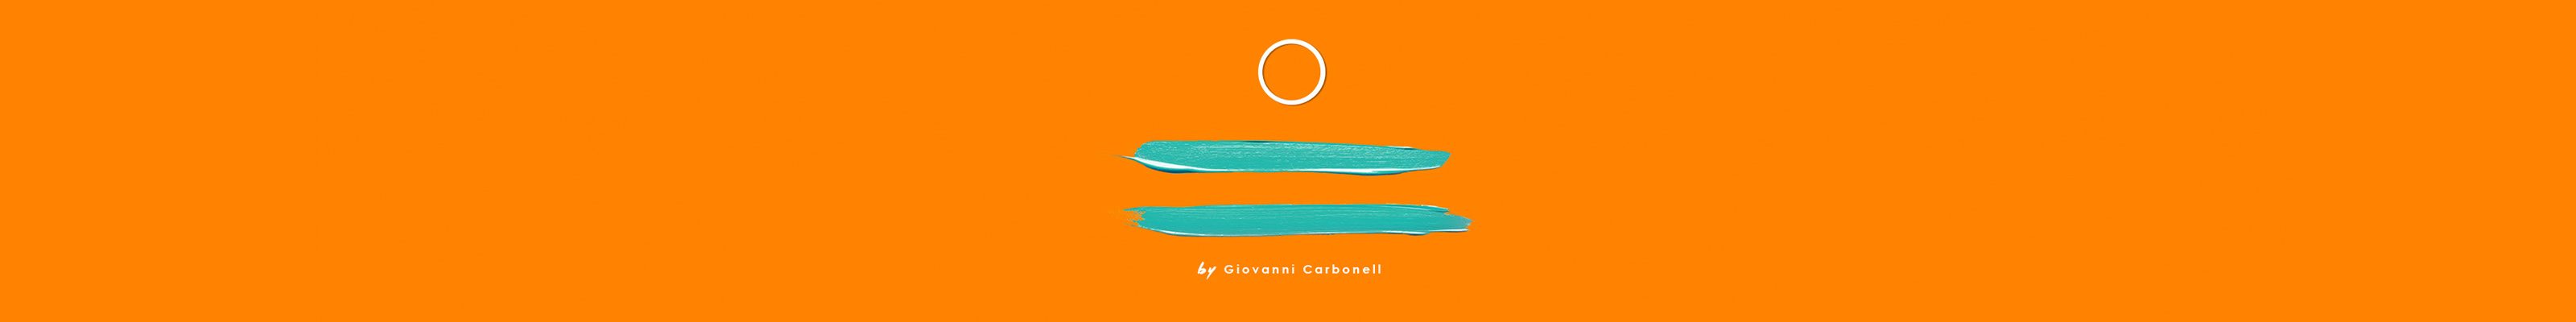 Giovanni G. Carbonell's profile banner